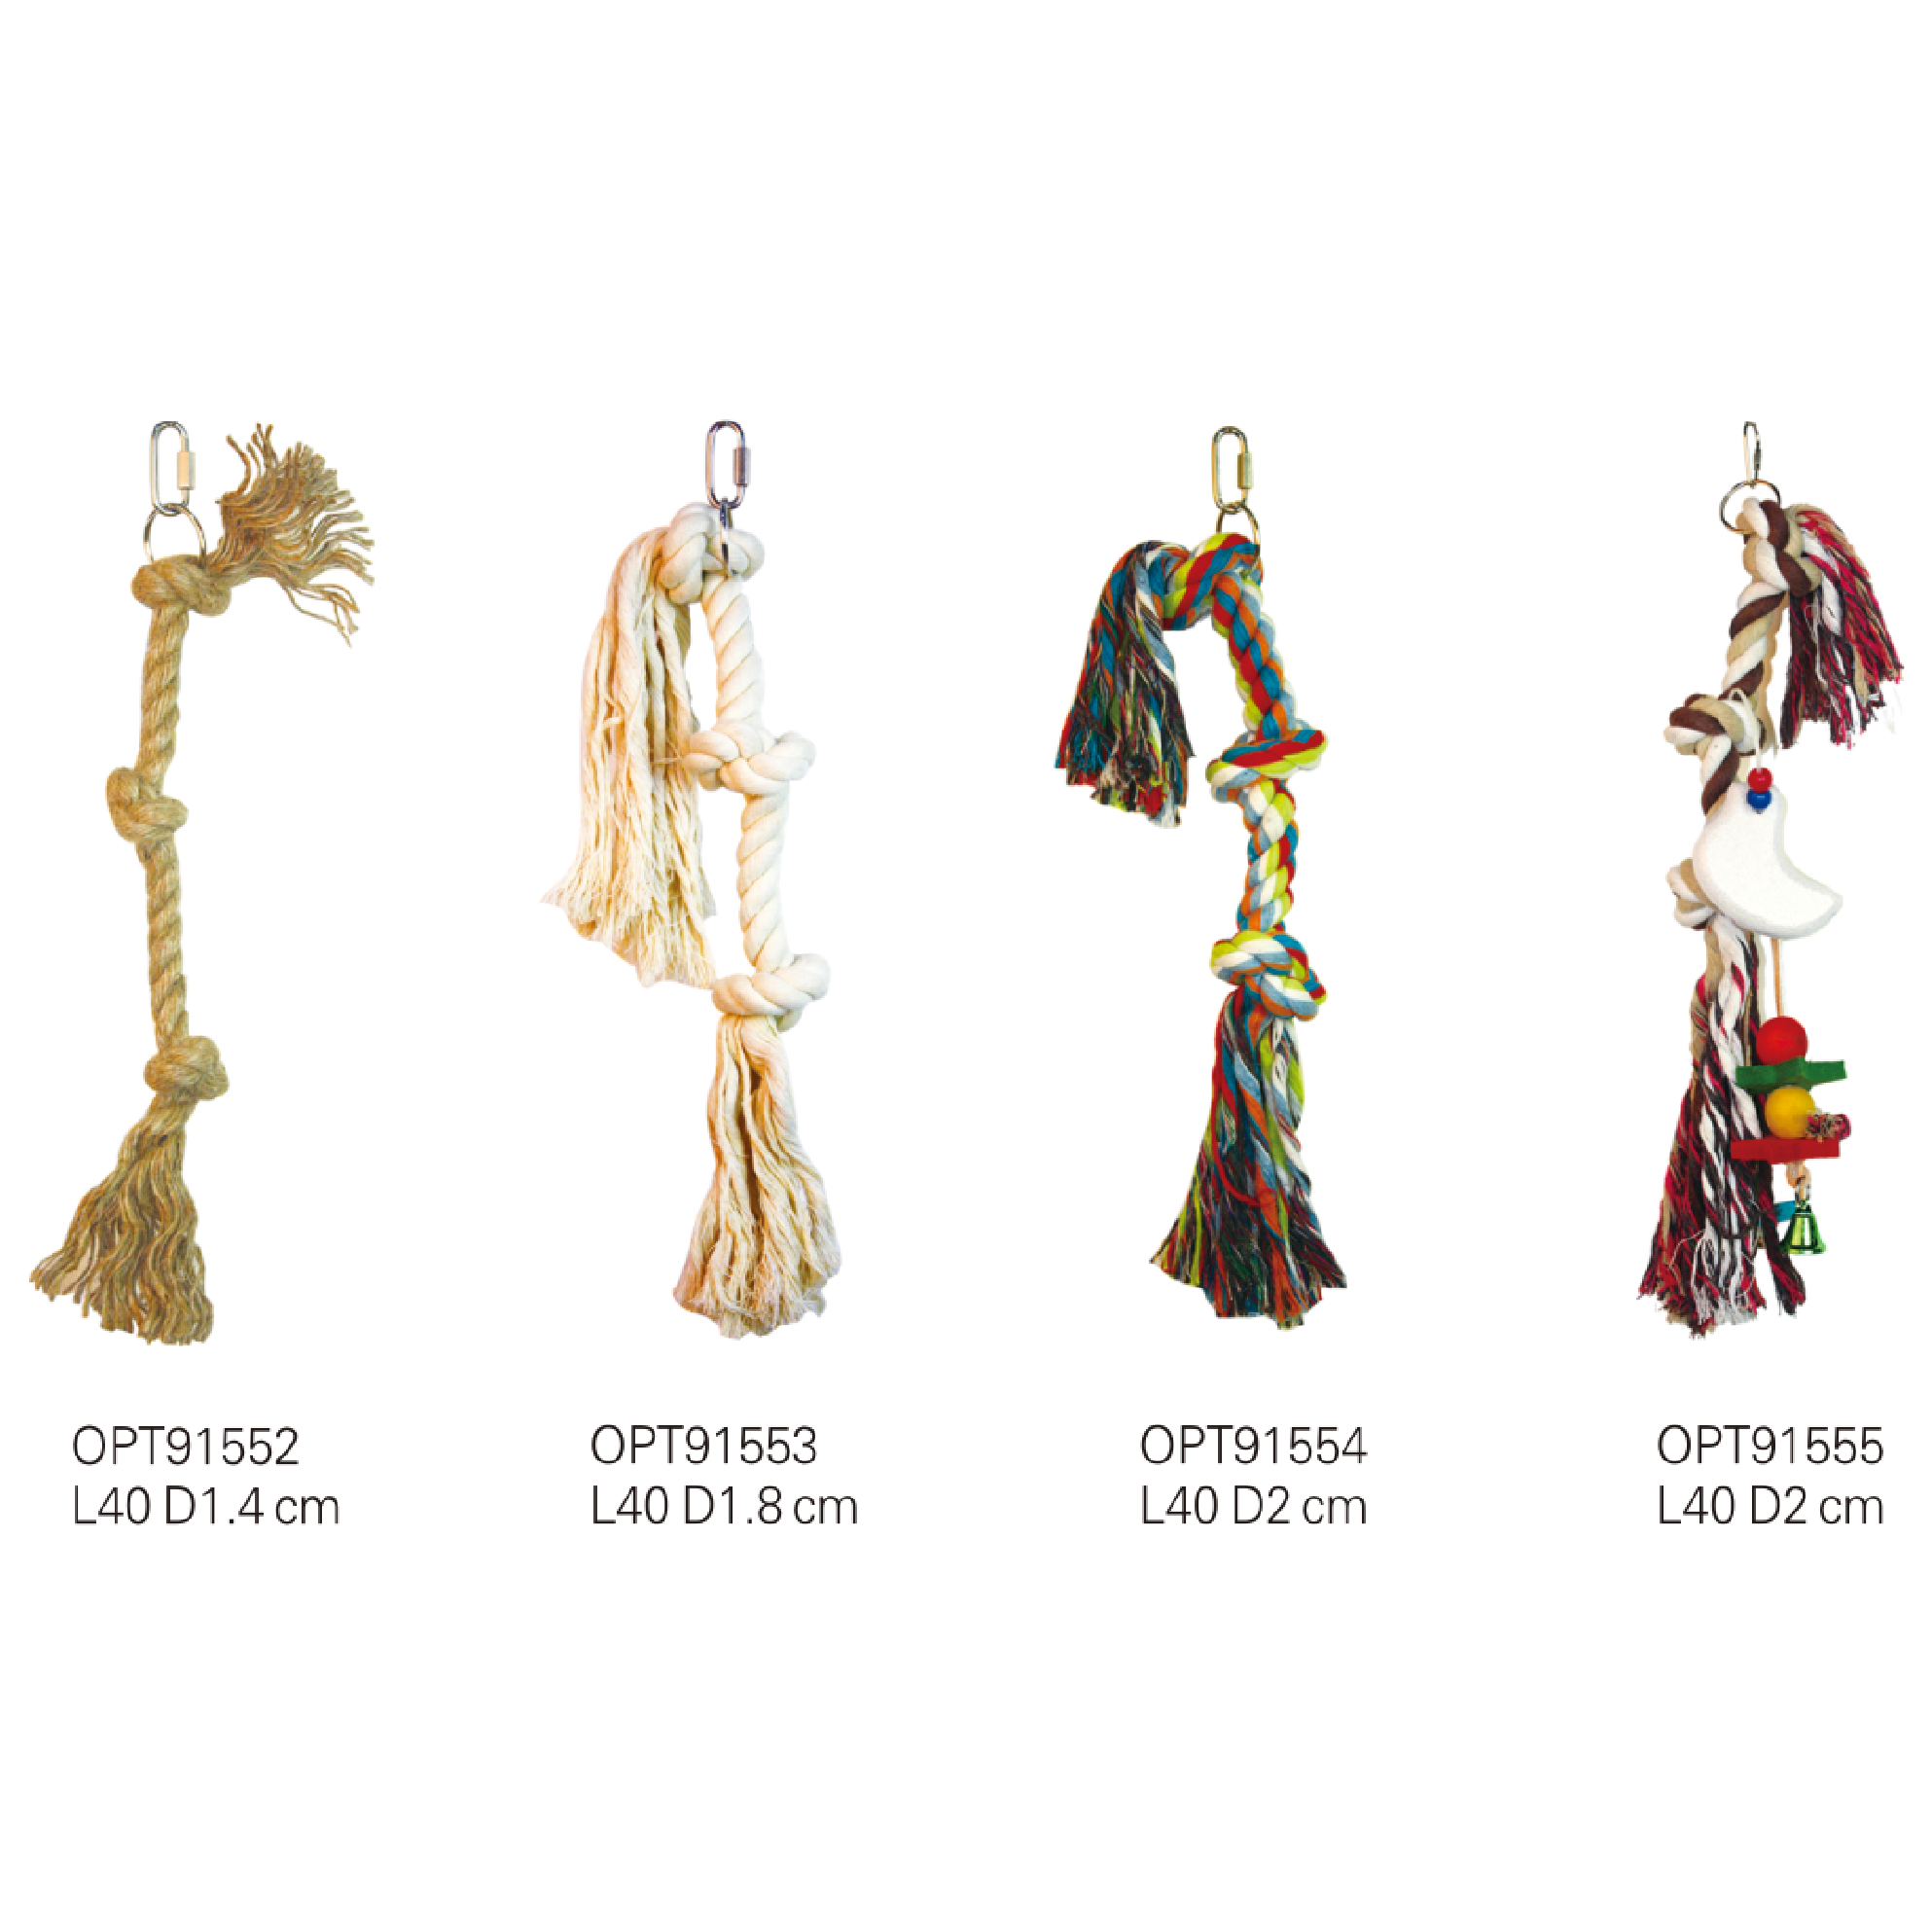 OPT91552-OPT91555 Bird toys Rope toys